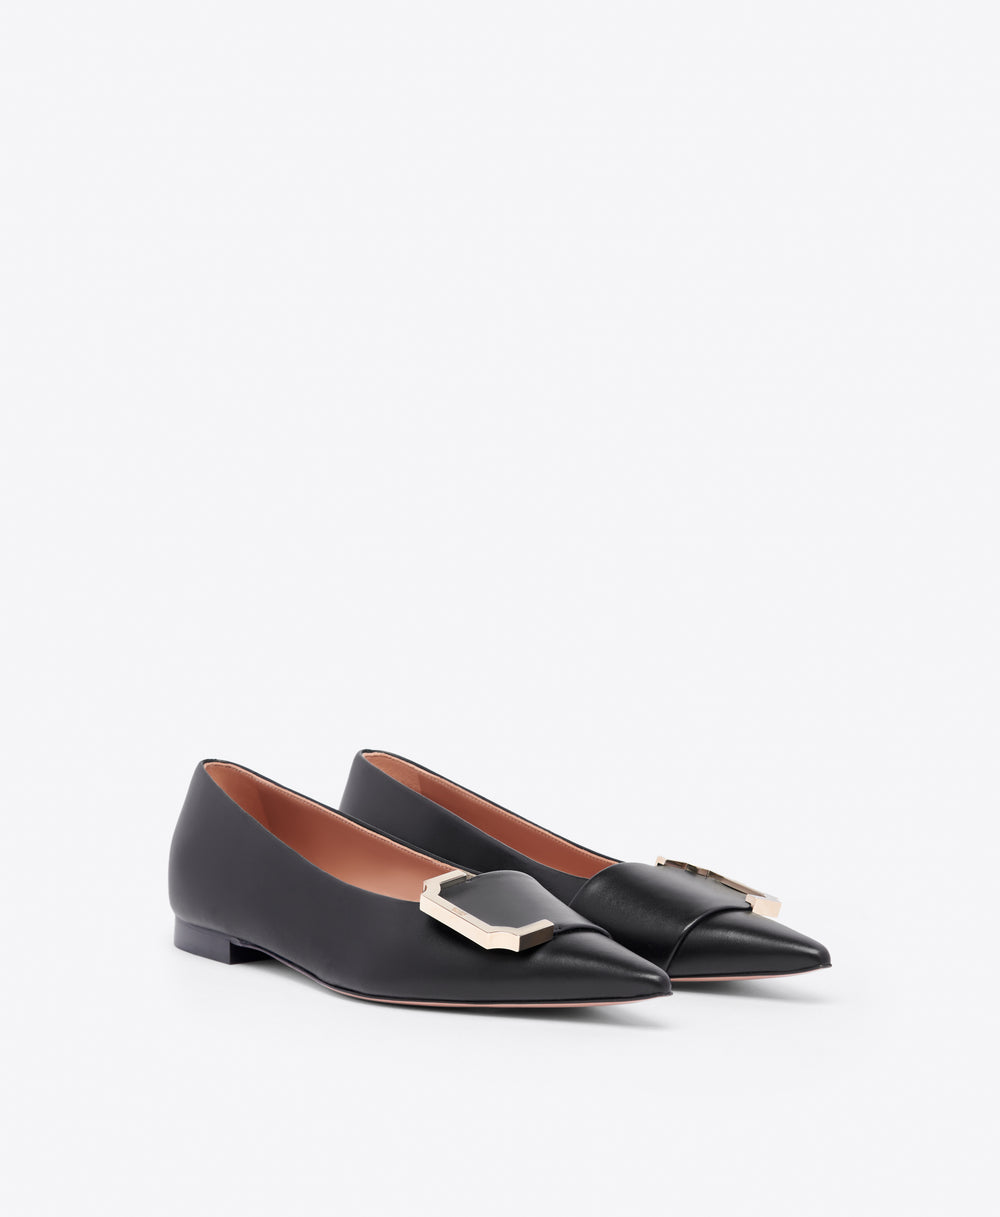 Hayes Flat Black Leather Flats Malone Souliers